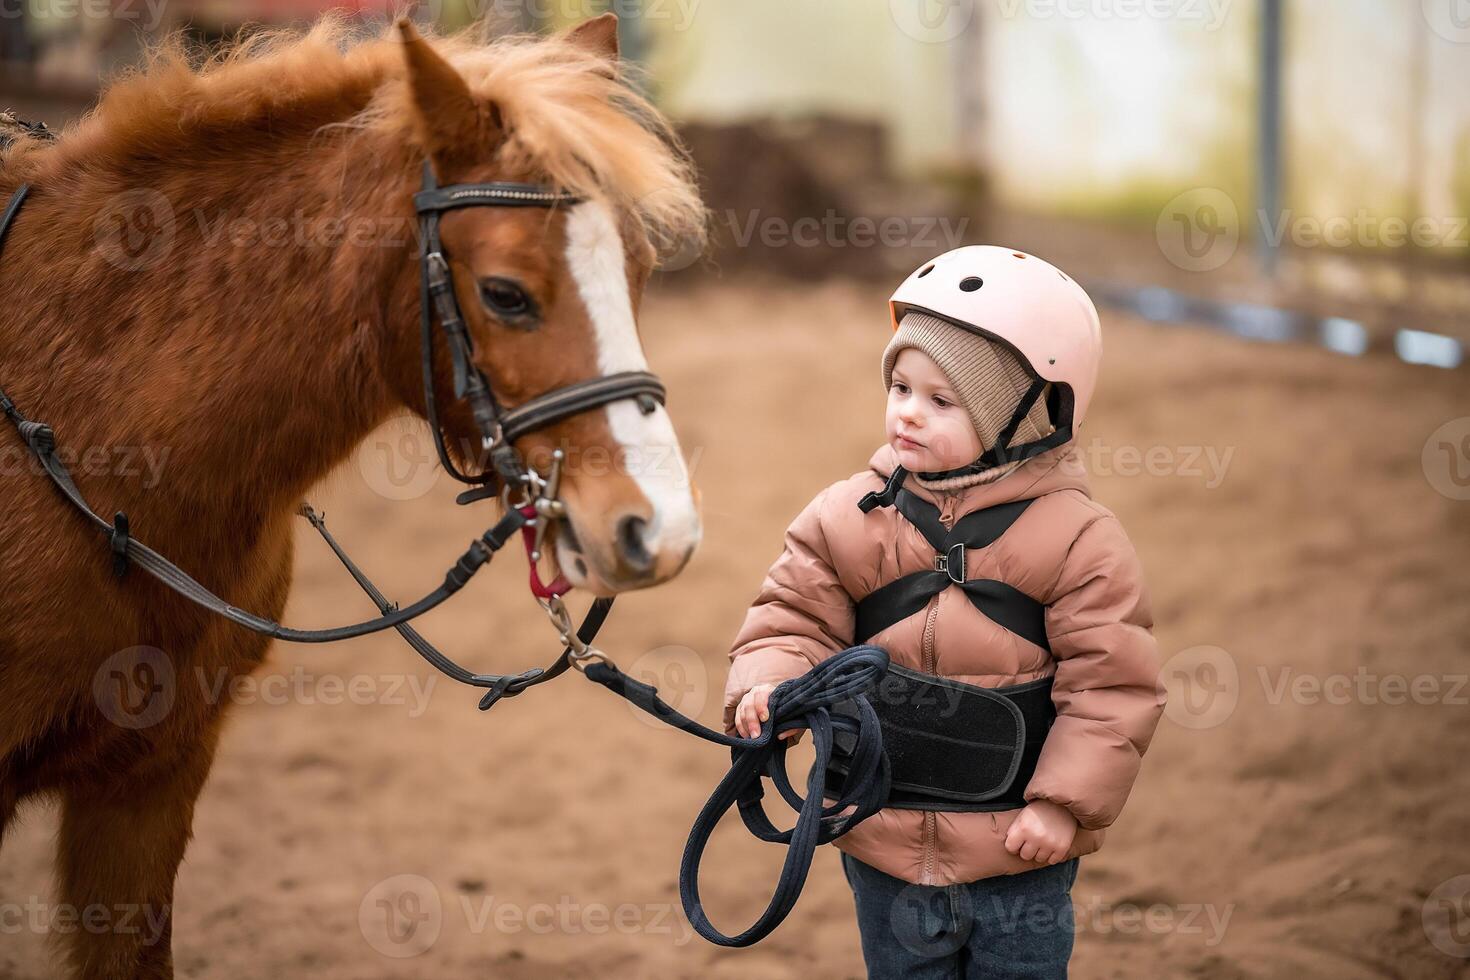 Portrait of little girl in protective jacket and helmet with her brown pony before riding Lesson photo